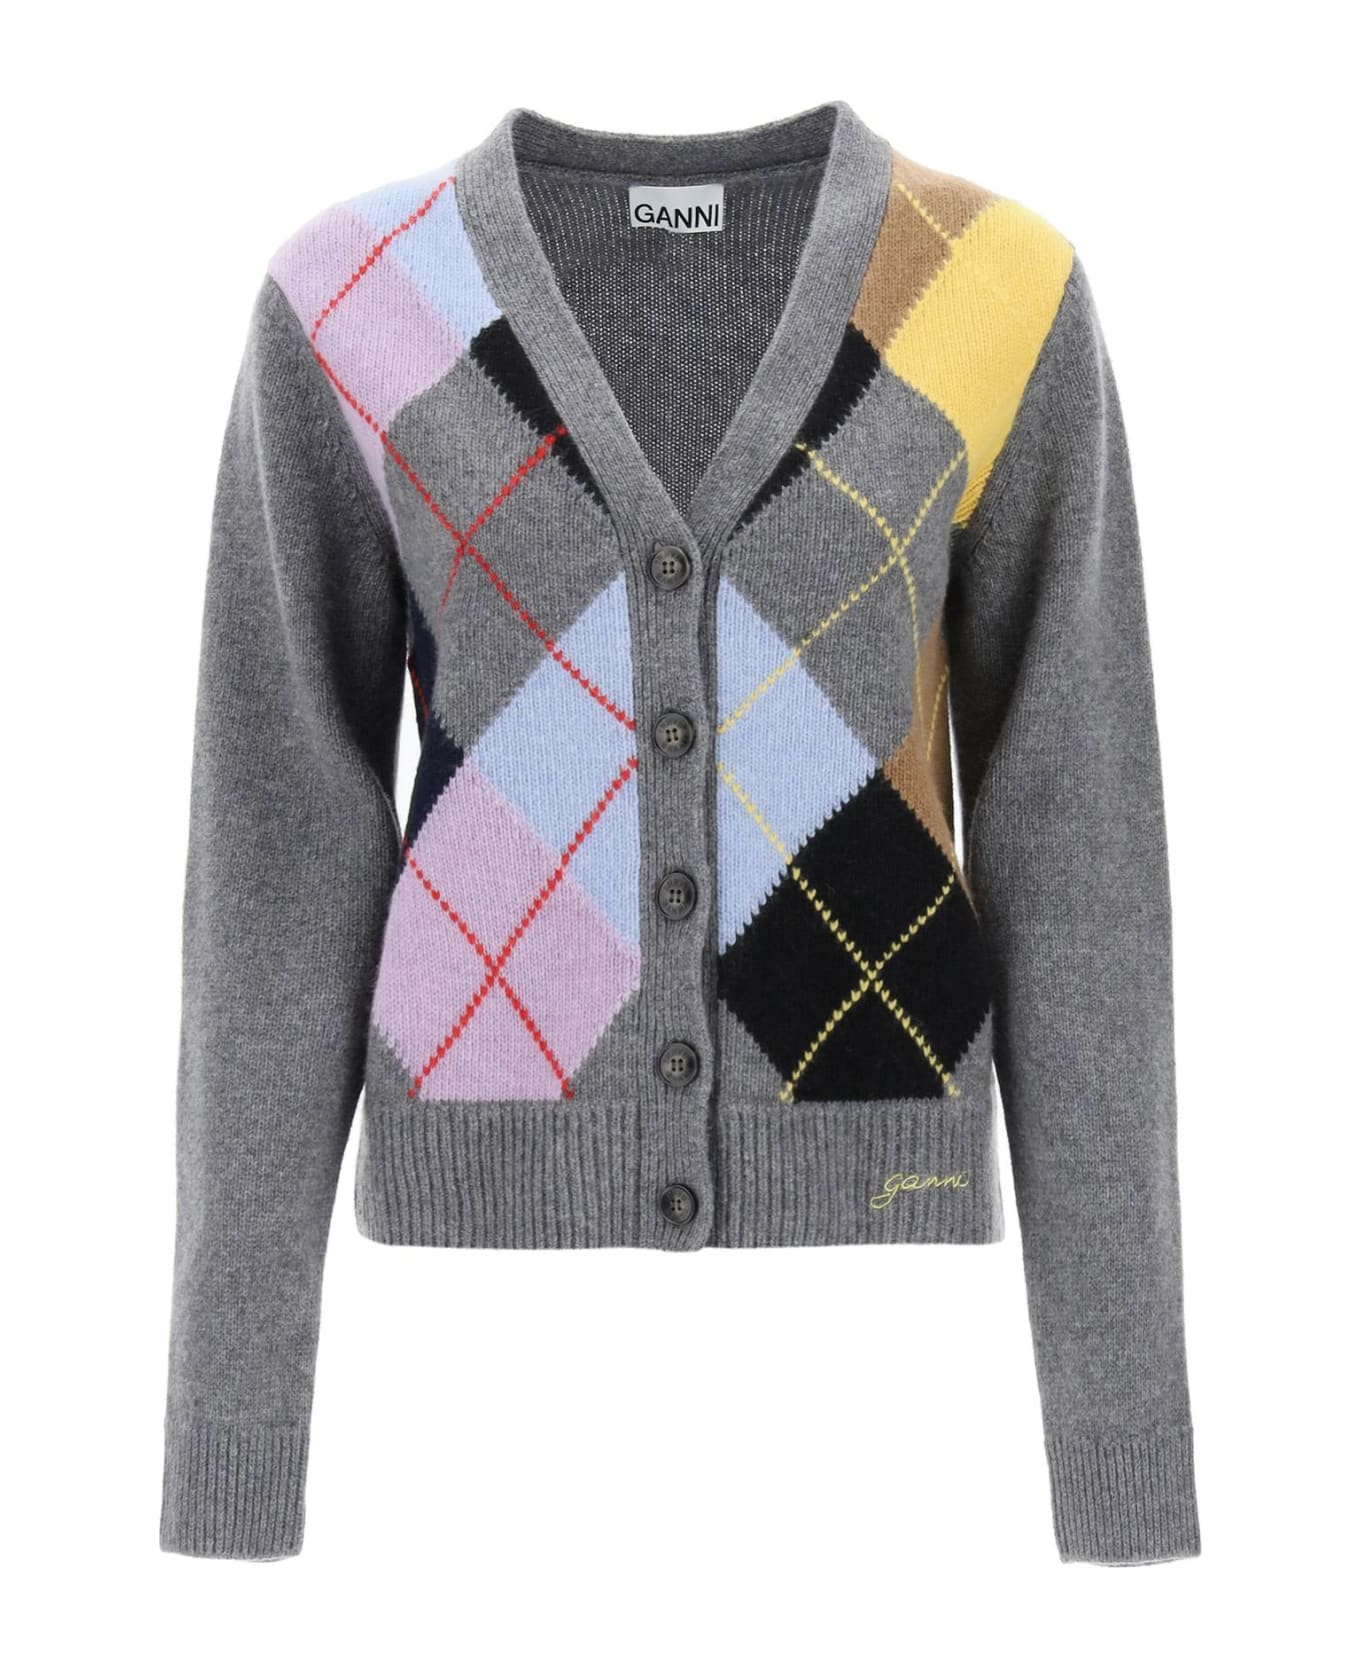 Ganni Cardigan With Argyle Pattern - FROST GRAY